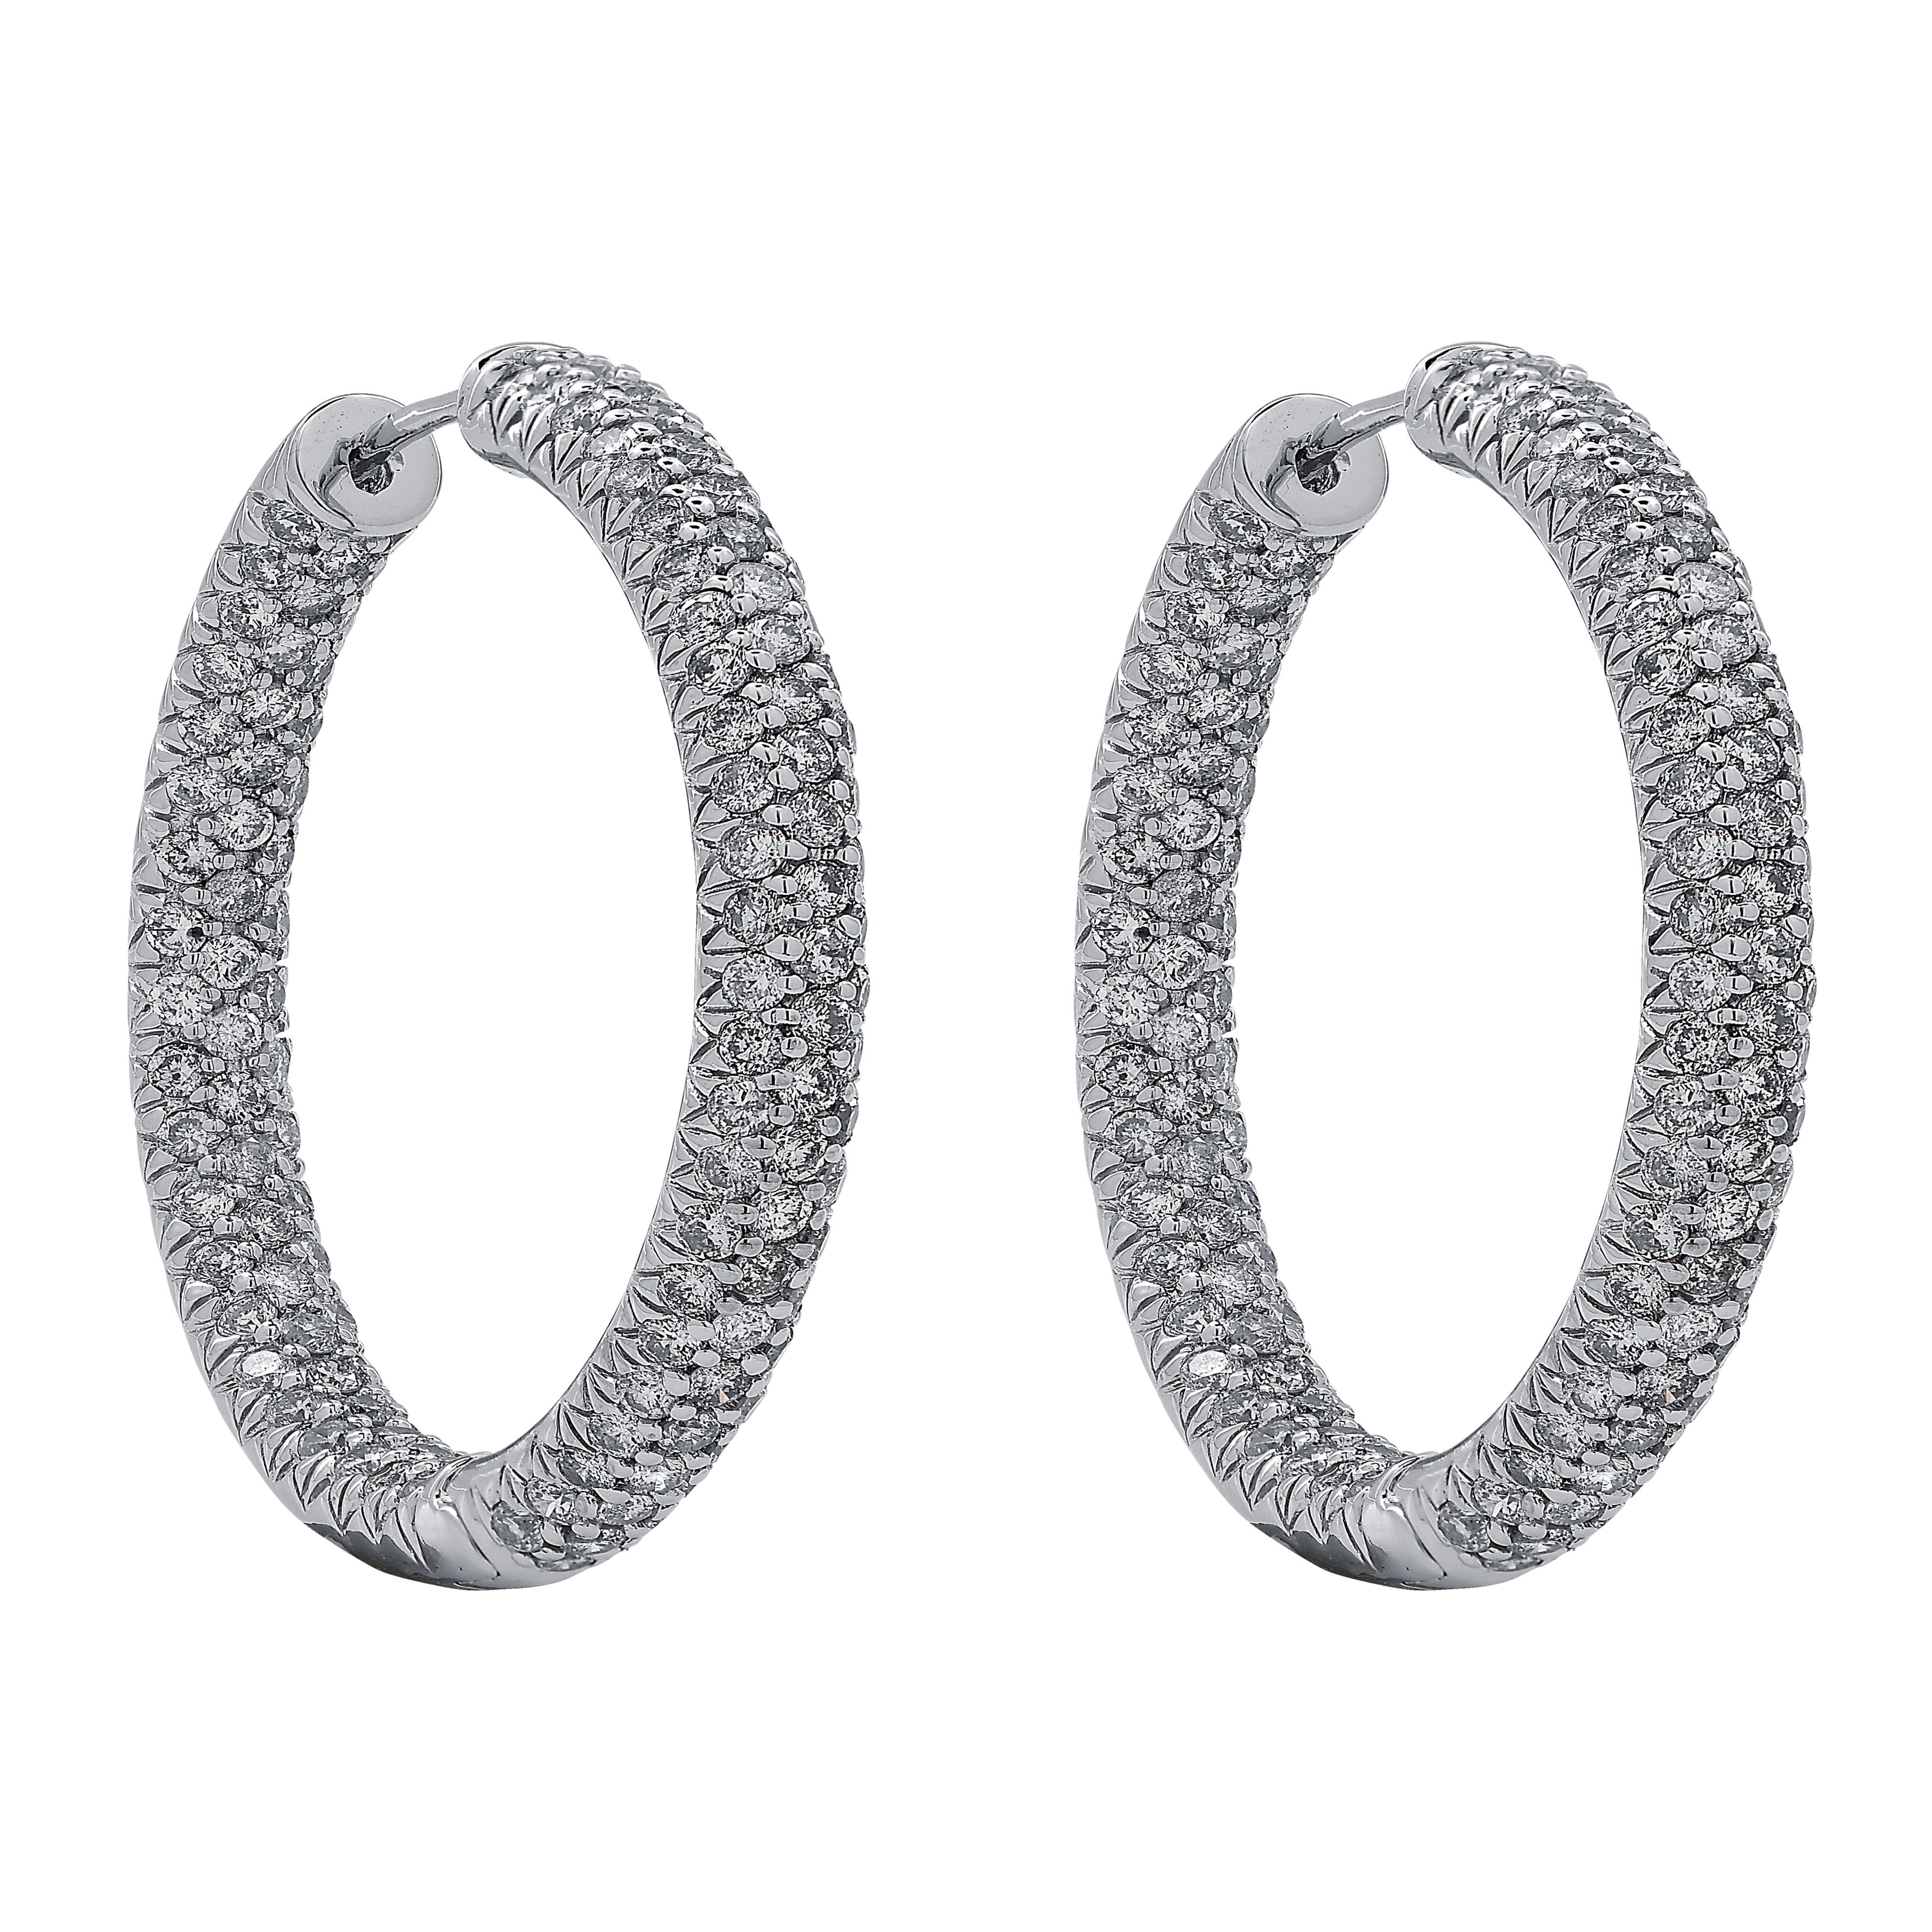 Dazzling pave diamond In/Out hoop earrings crafted in 18 karat white gold. These stunning earrings are pave set with diamonds weighing approximately 5.5 carats total, G-H color, SI clarity. The diamonds are set on the outside and the inside of the